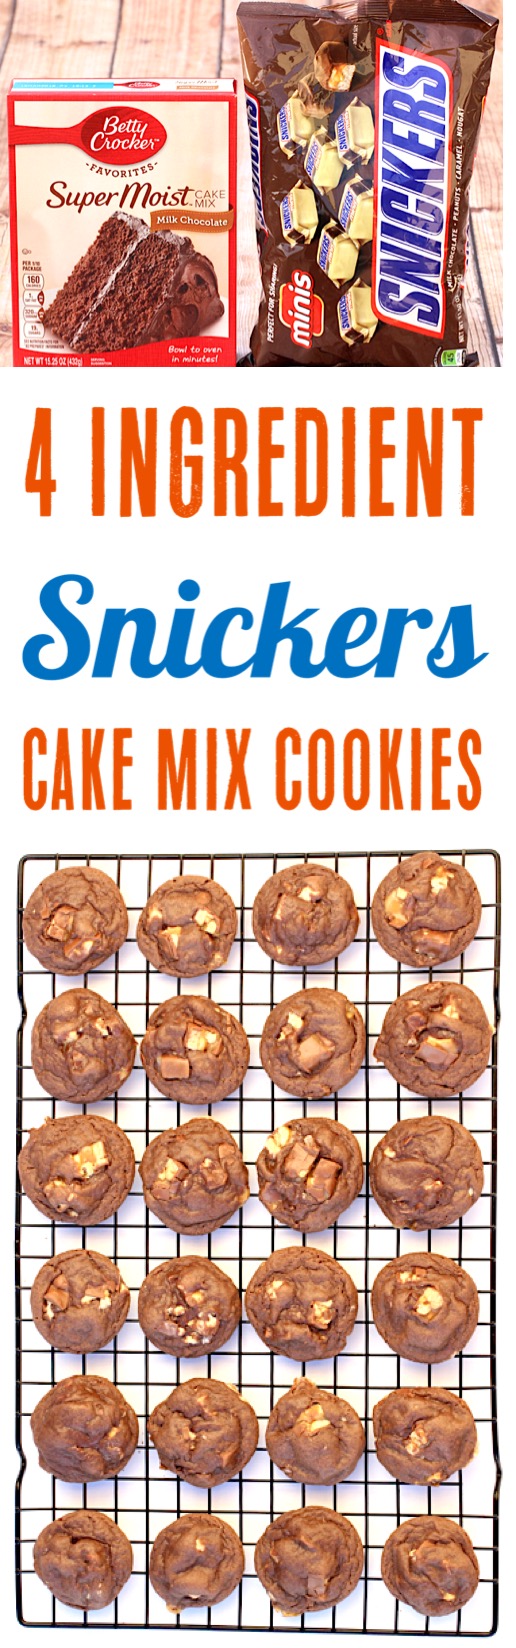 Snickers Cookies Recipes Easy Cake Mix Cookie Recipe using Snickers Candy Bars - Just 4 Ingredients